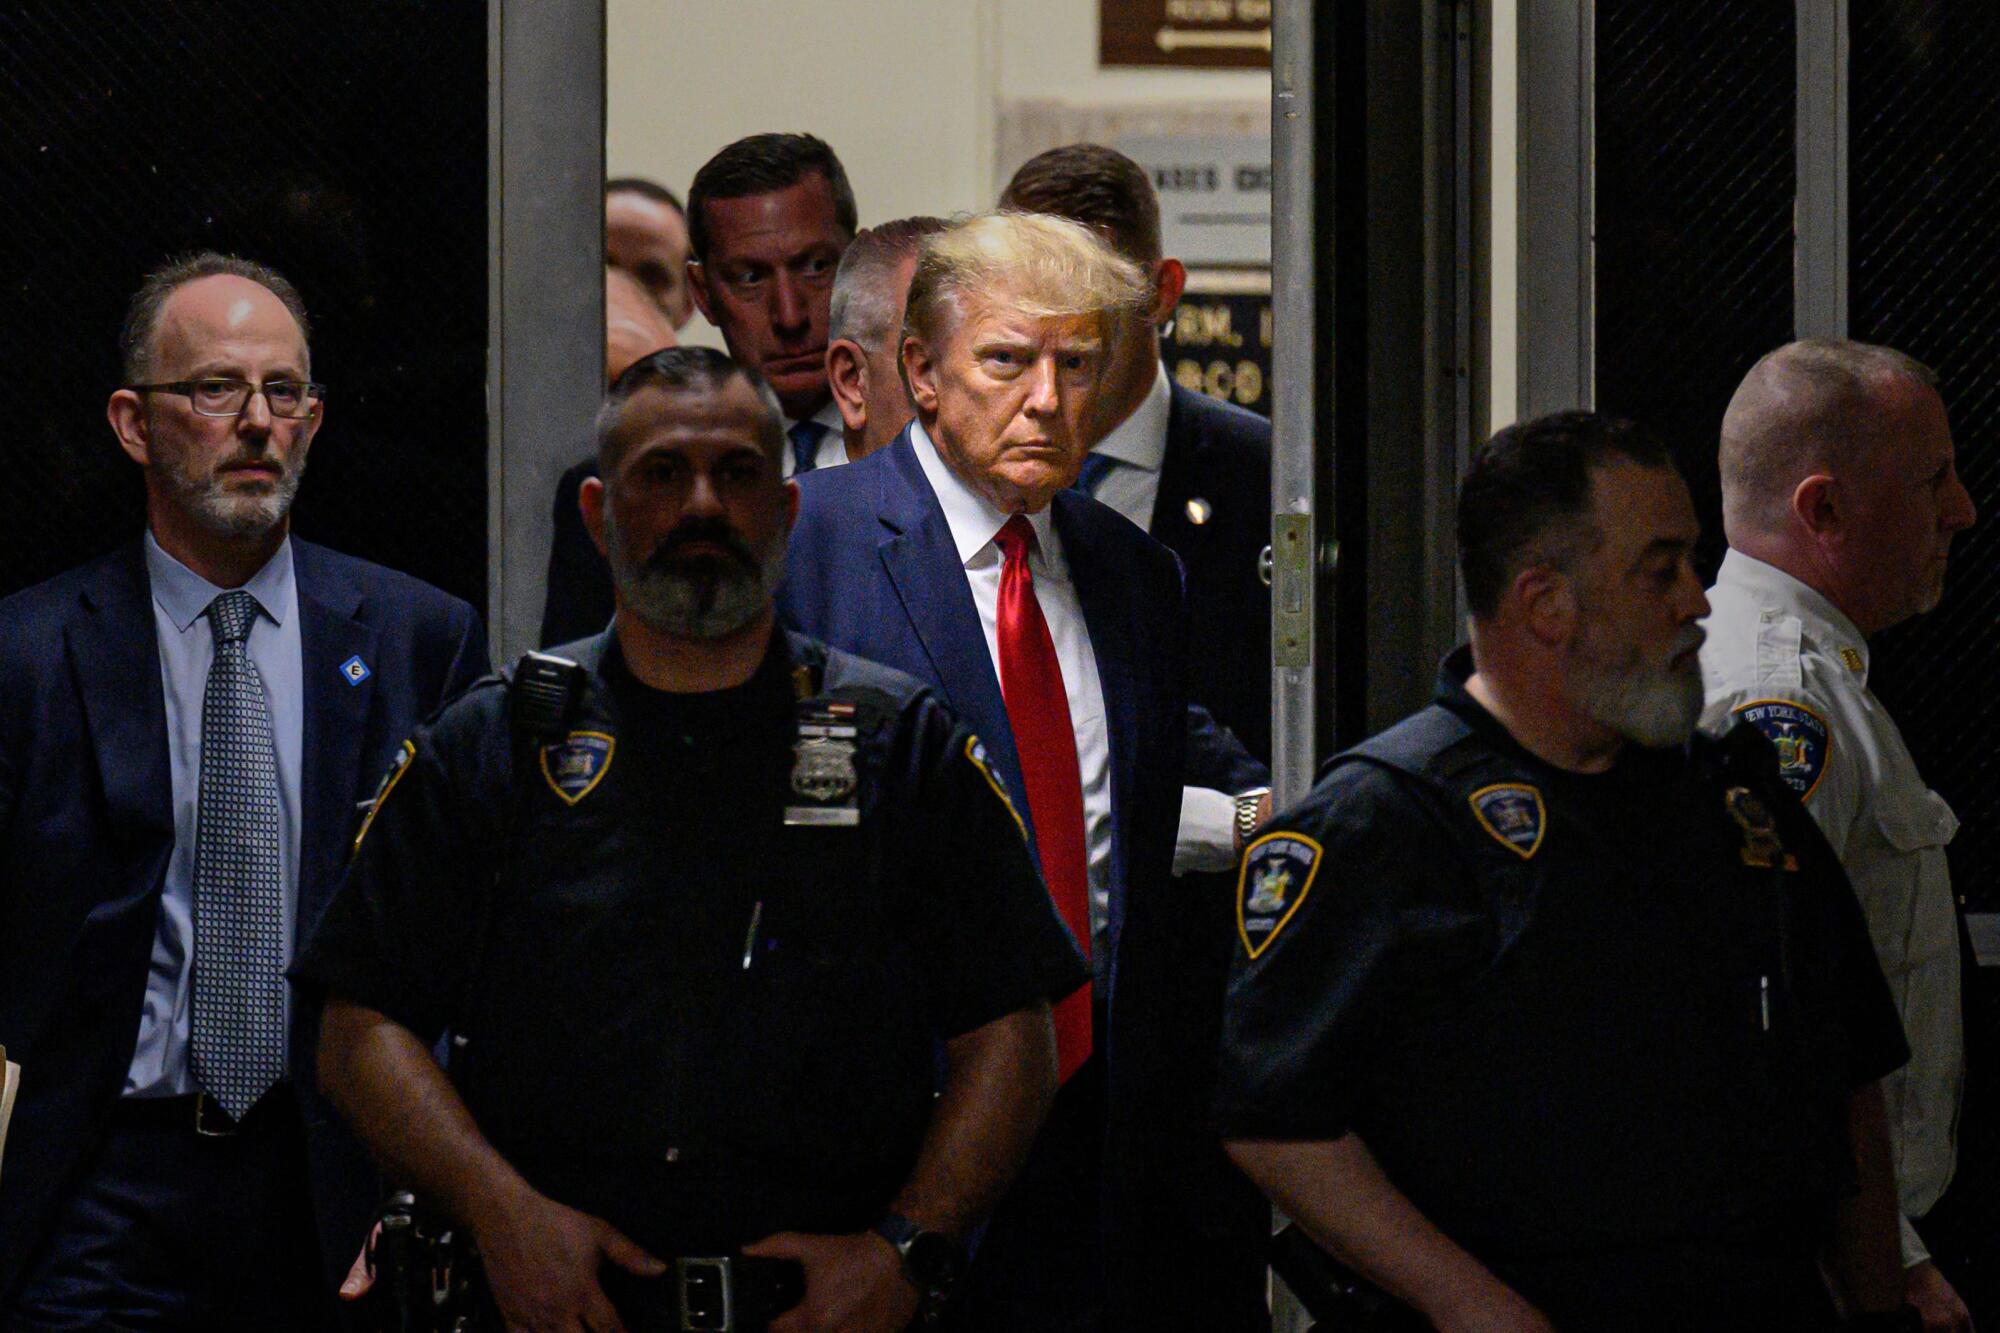 Surrounded by security, Donald Trump makes his way inside the Manhattan curthouse.